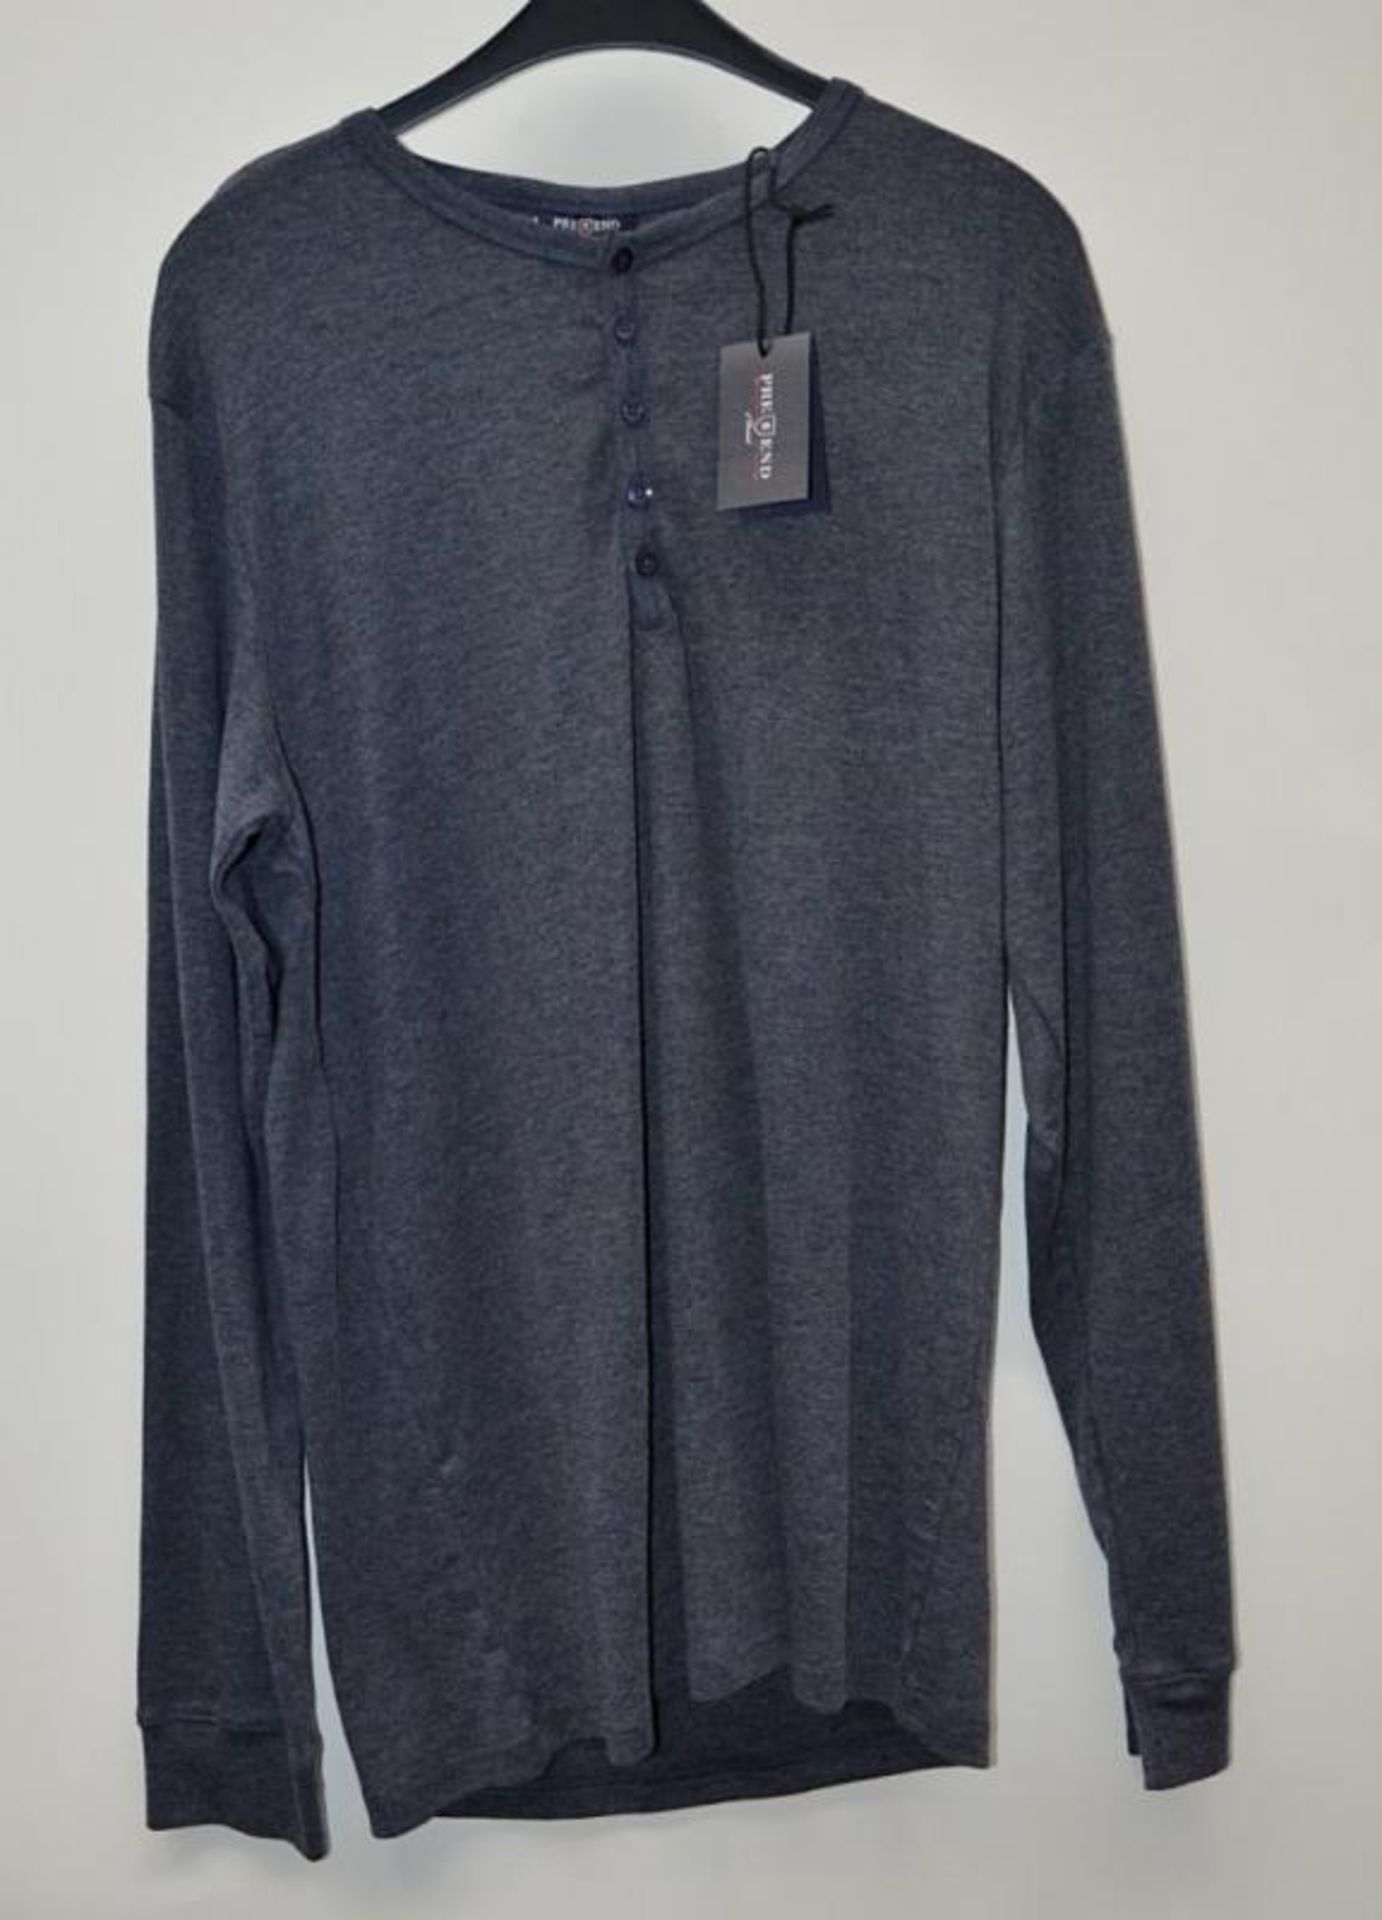 5 x Assorted PRE END Branded Mens Long Sleeve Tops - New Stock With Tags - Recent Retail Closure - - Image 6 of 8